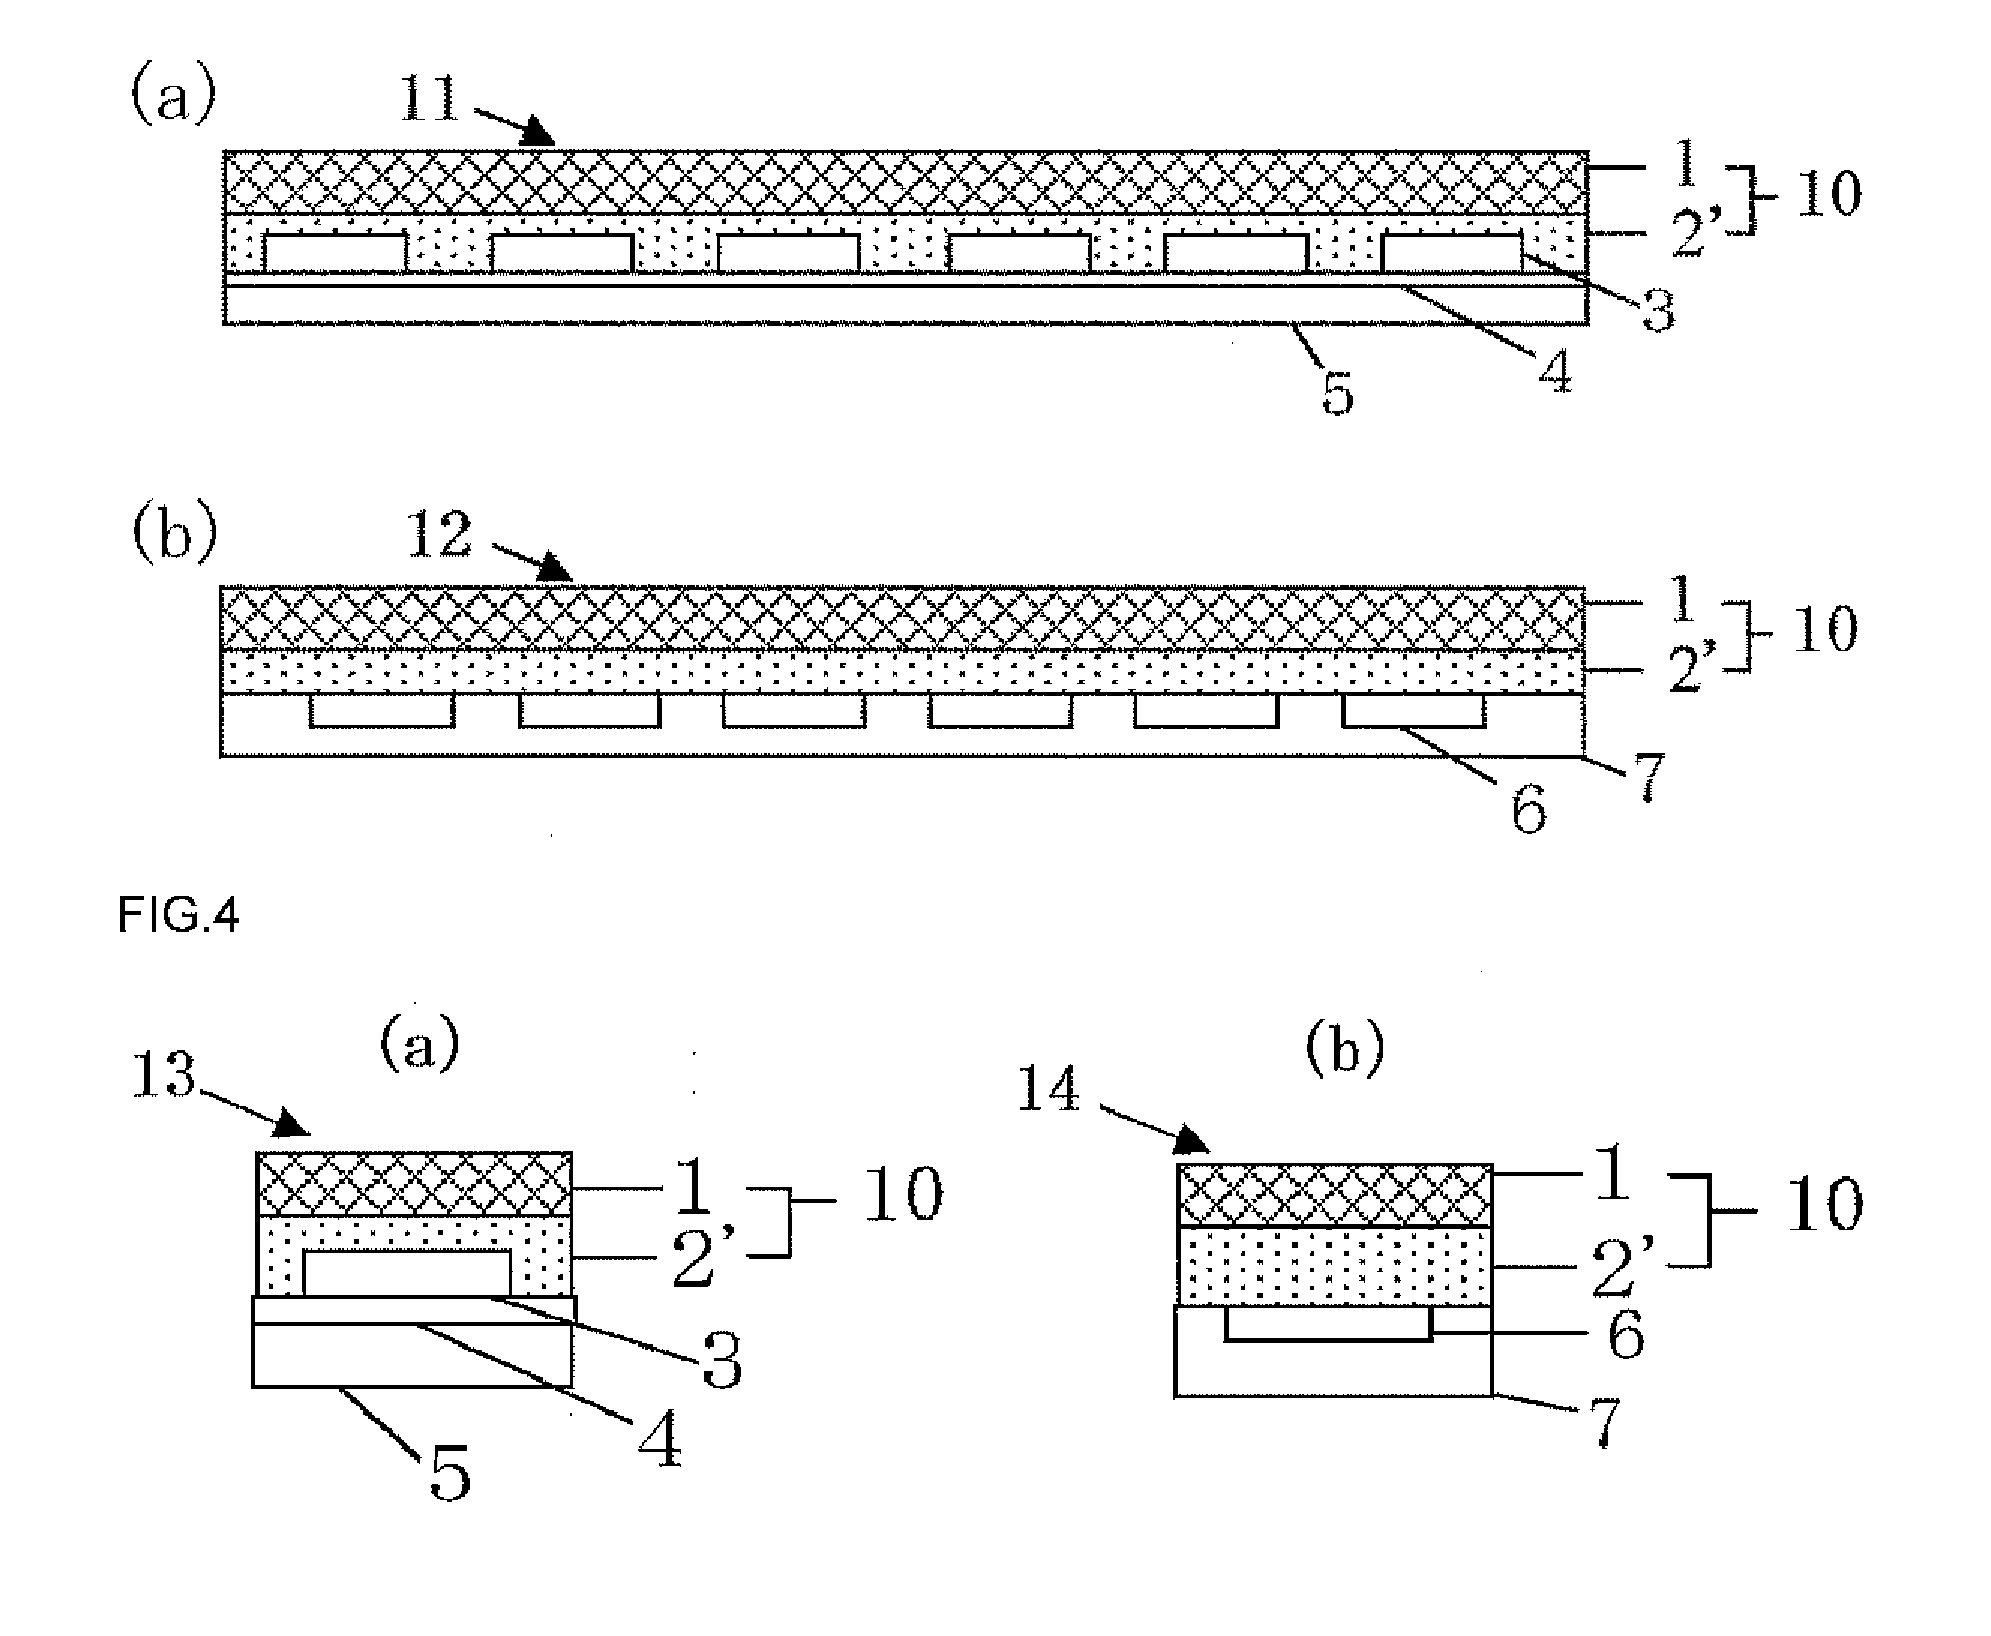 Encapsulant equipped with supporting substrate, encapsulated substrate having semiconductor devices mounting thereon, encapsulated wafer having semiconductor devices forming thereon, semiconductor apparatus, and method for manufacturing semiconductor apparatus